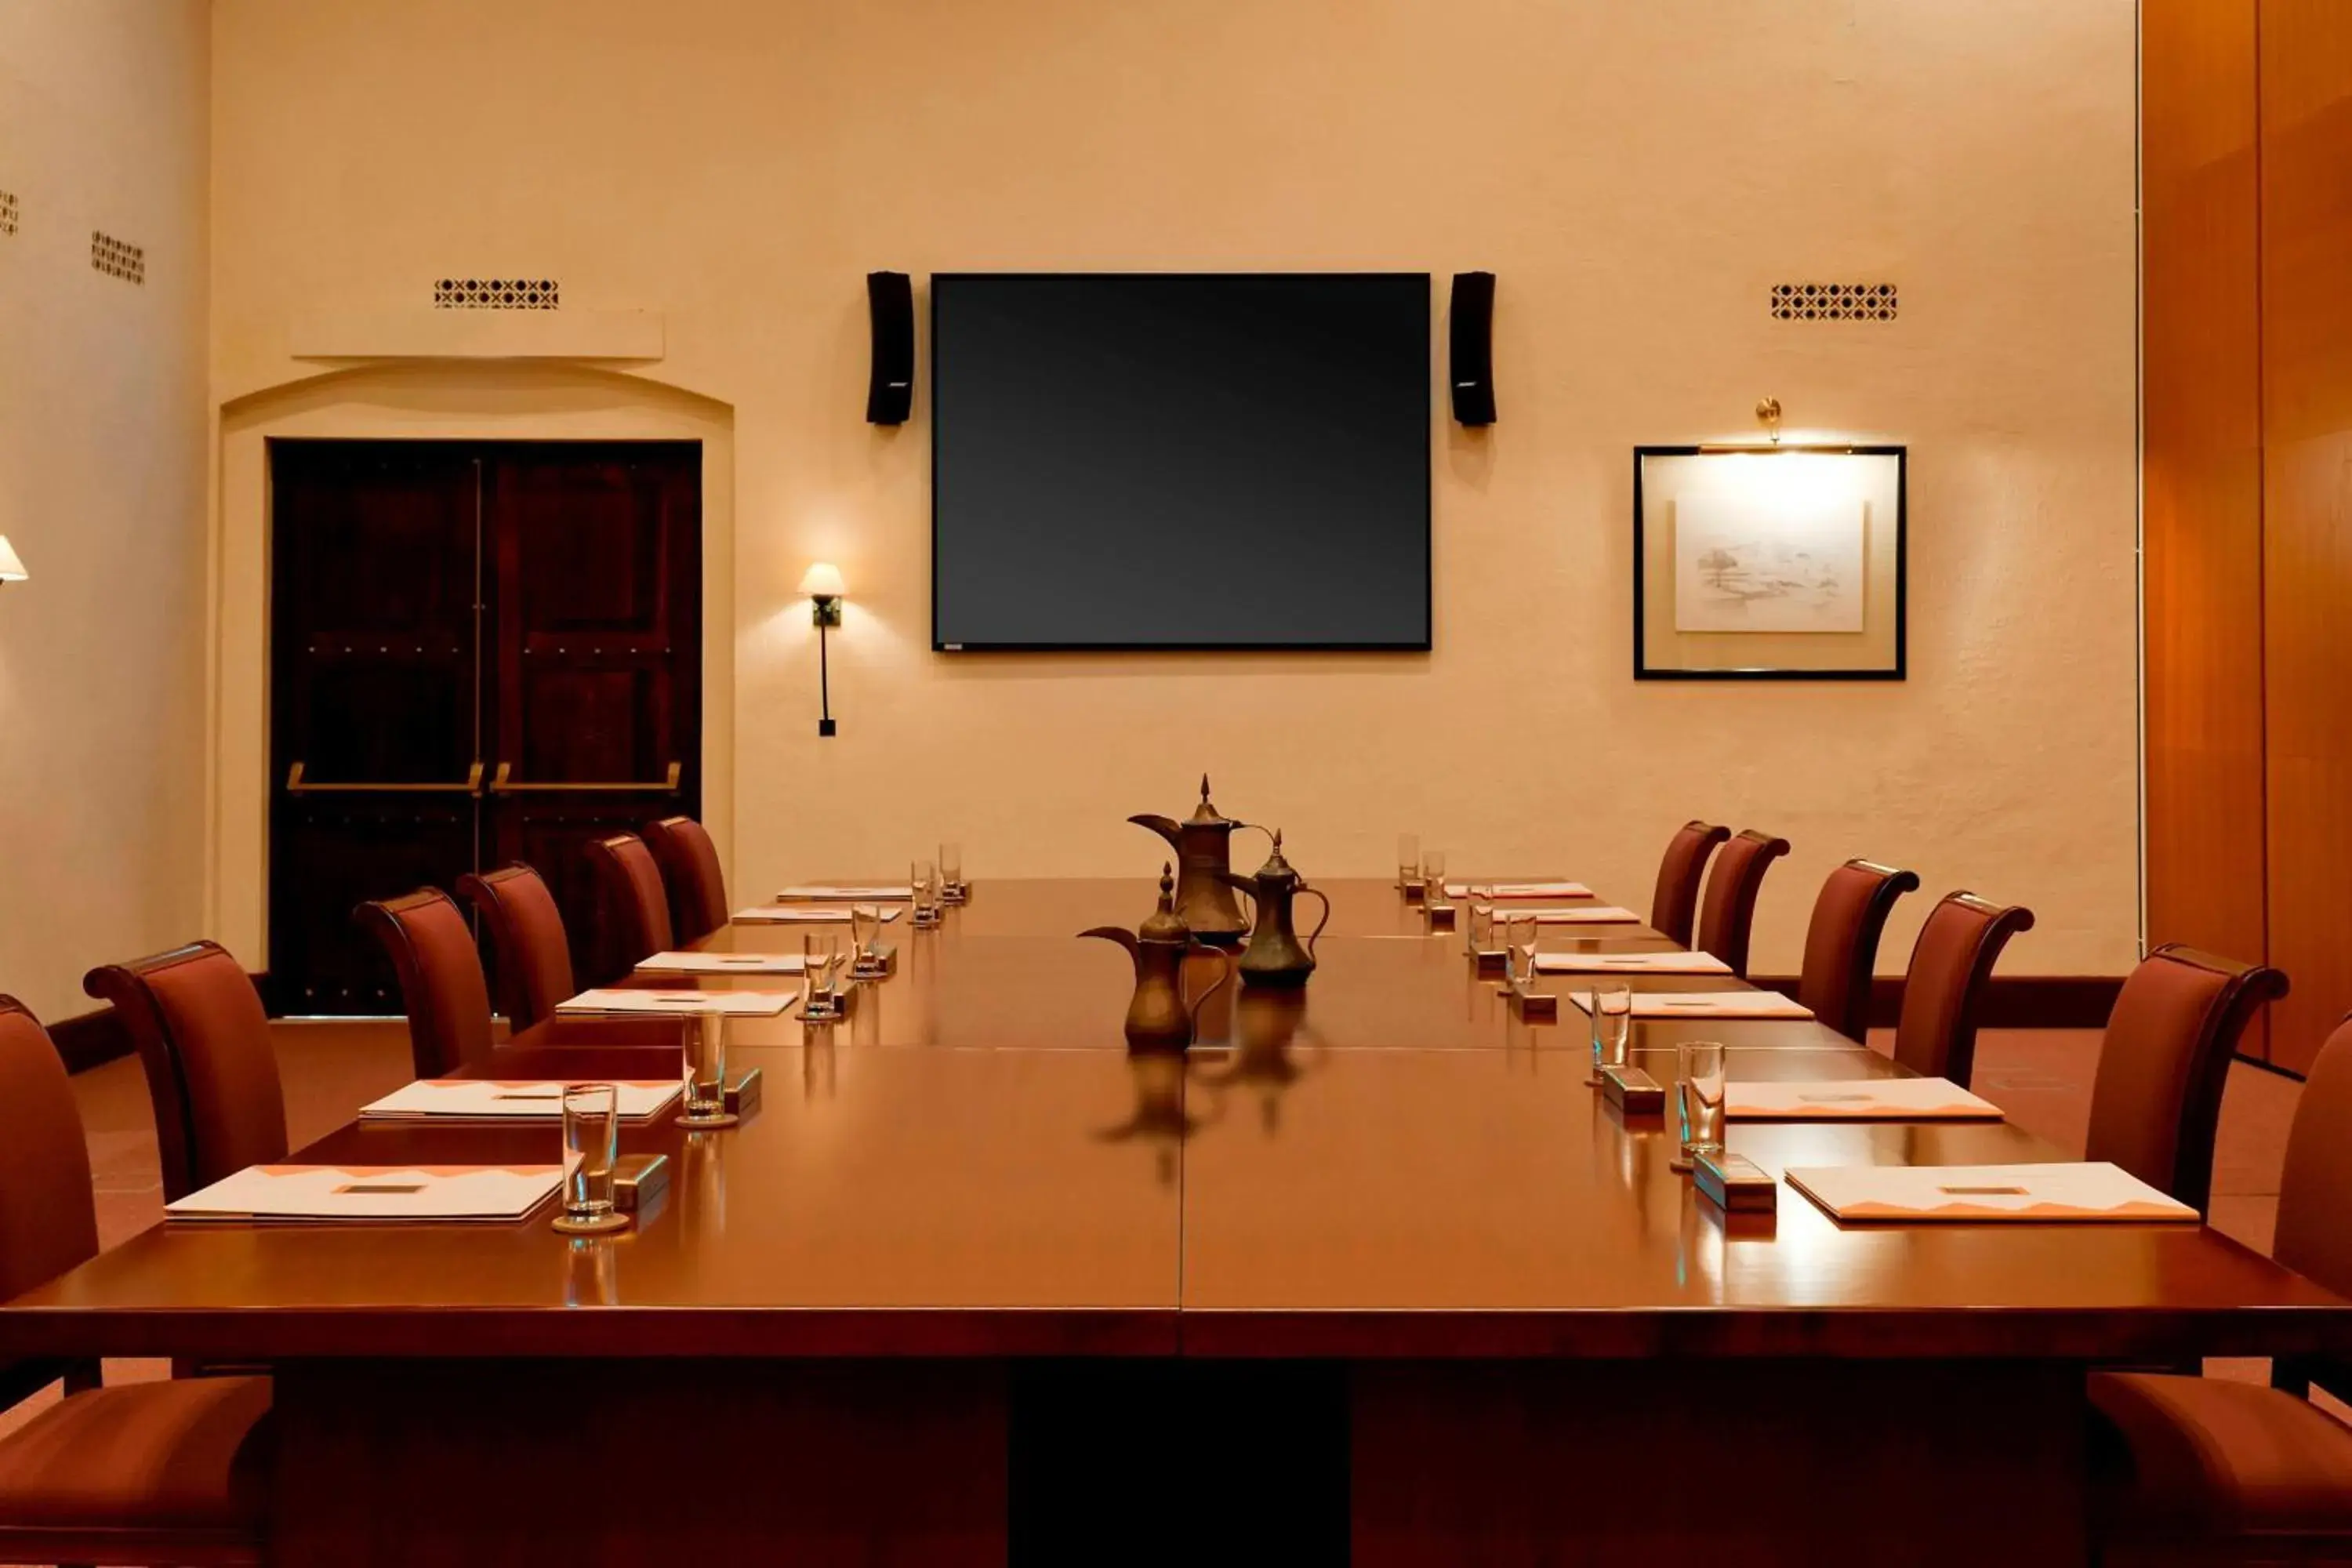 Meeting/conference room in Al Maha, a Luxury Collection Desert Resort & Spa, Dubai